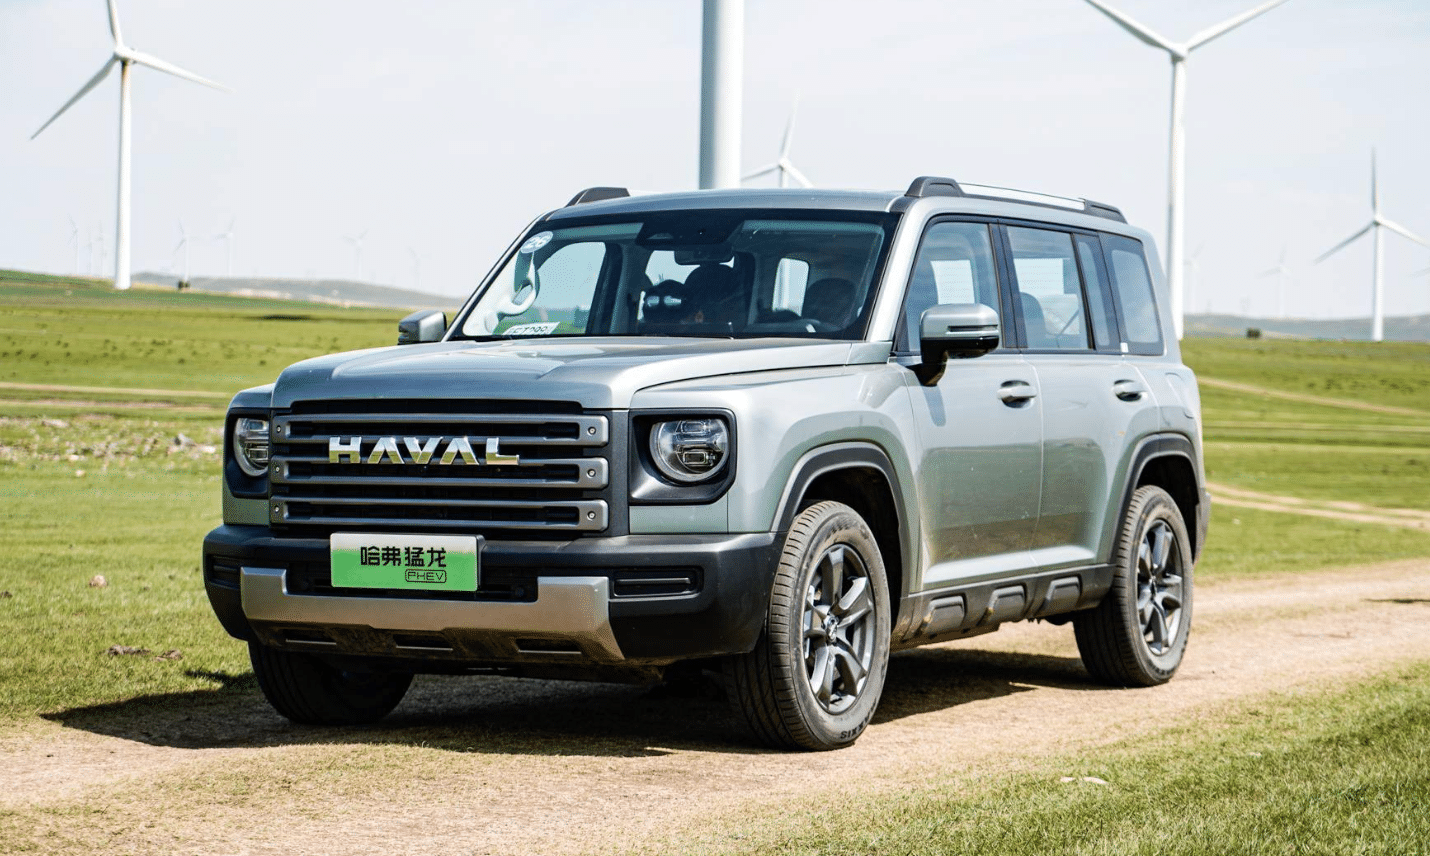 GWM Haval Raptor enters market, available from 22,700 USD